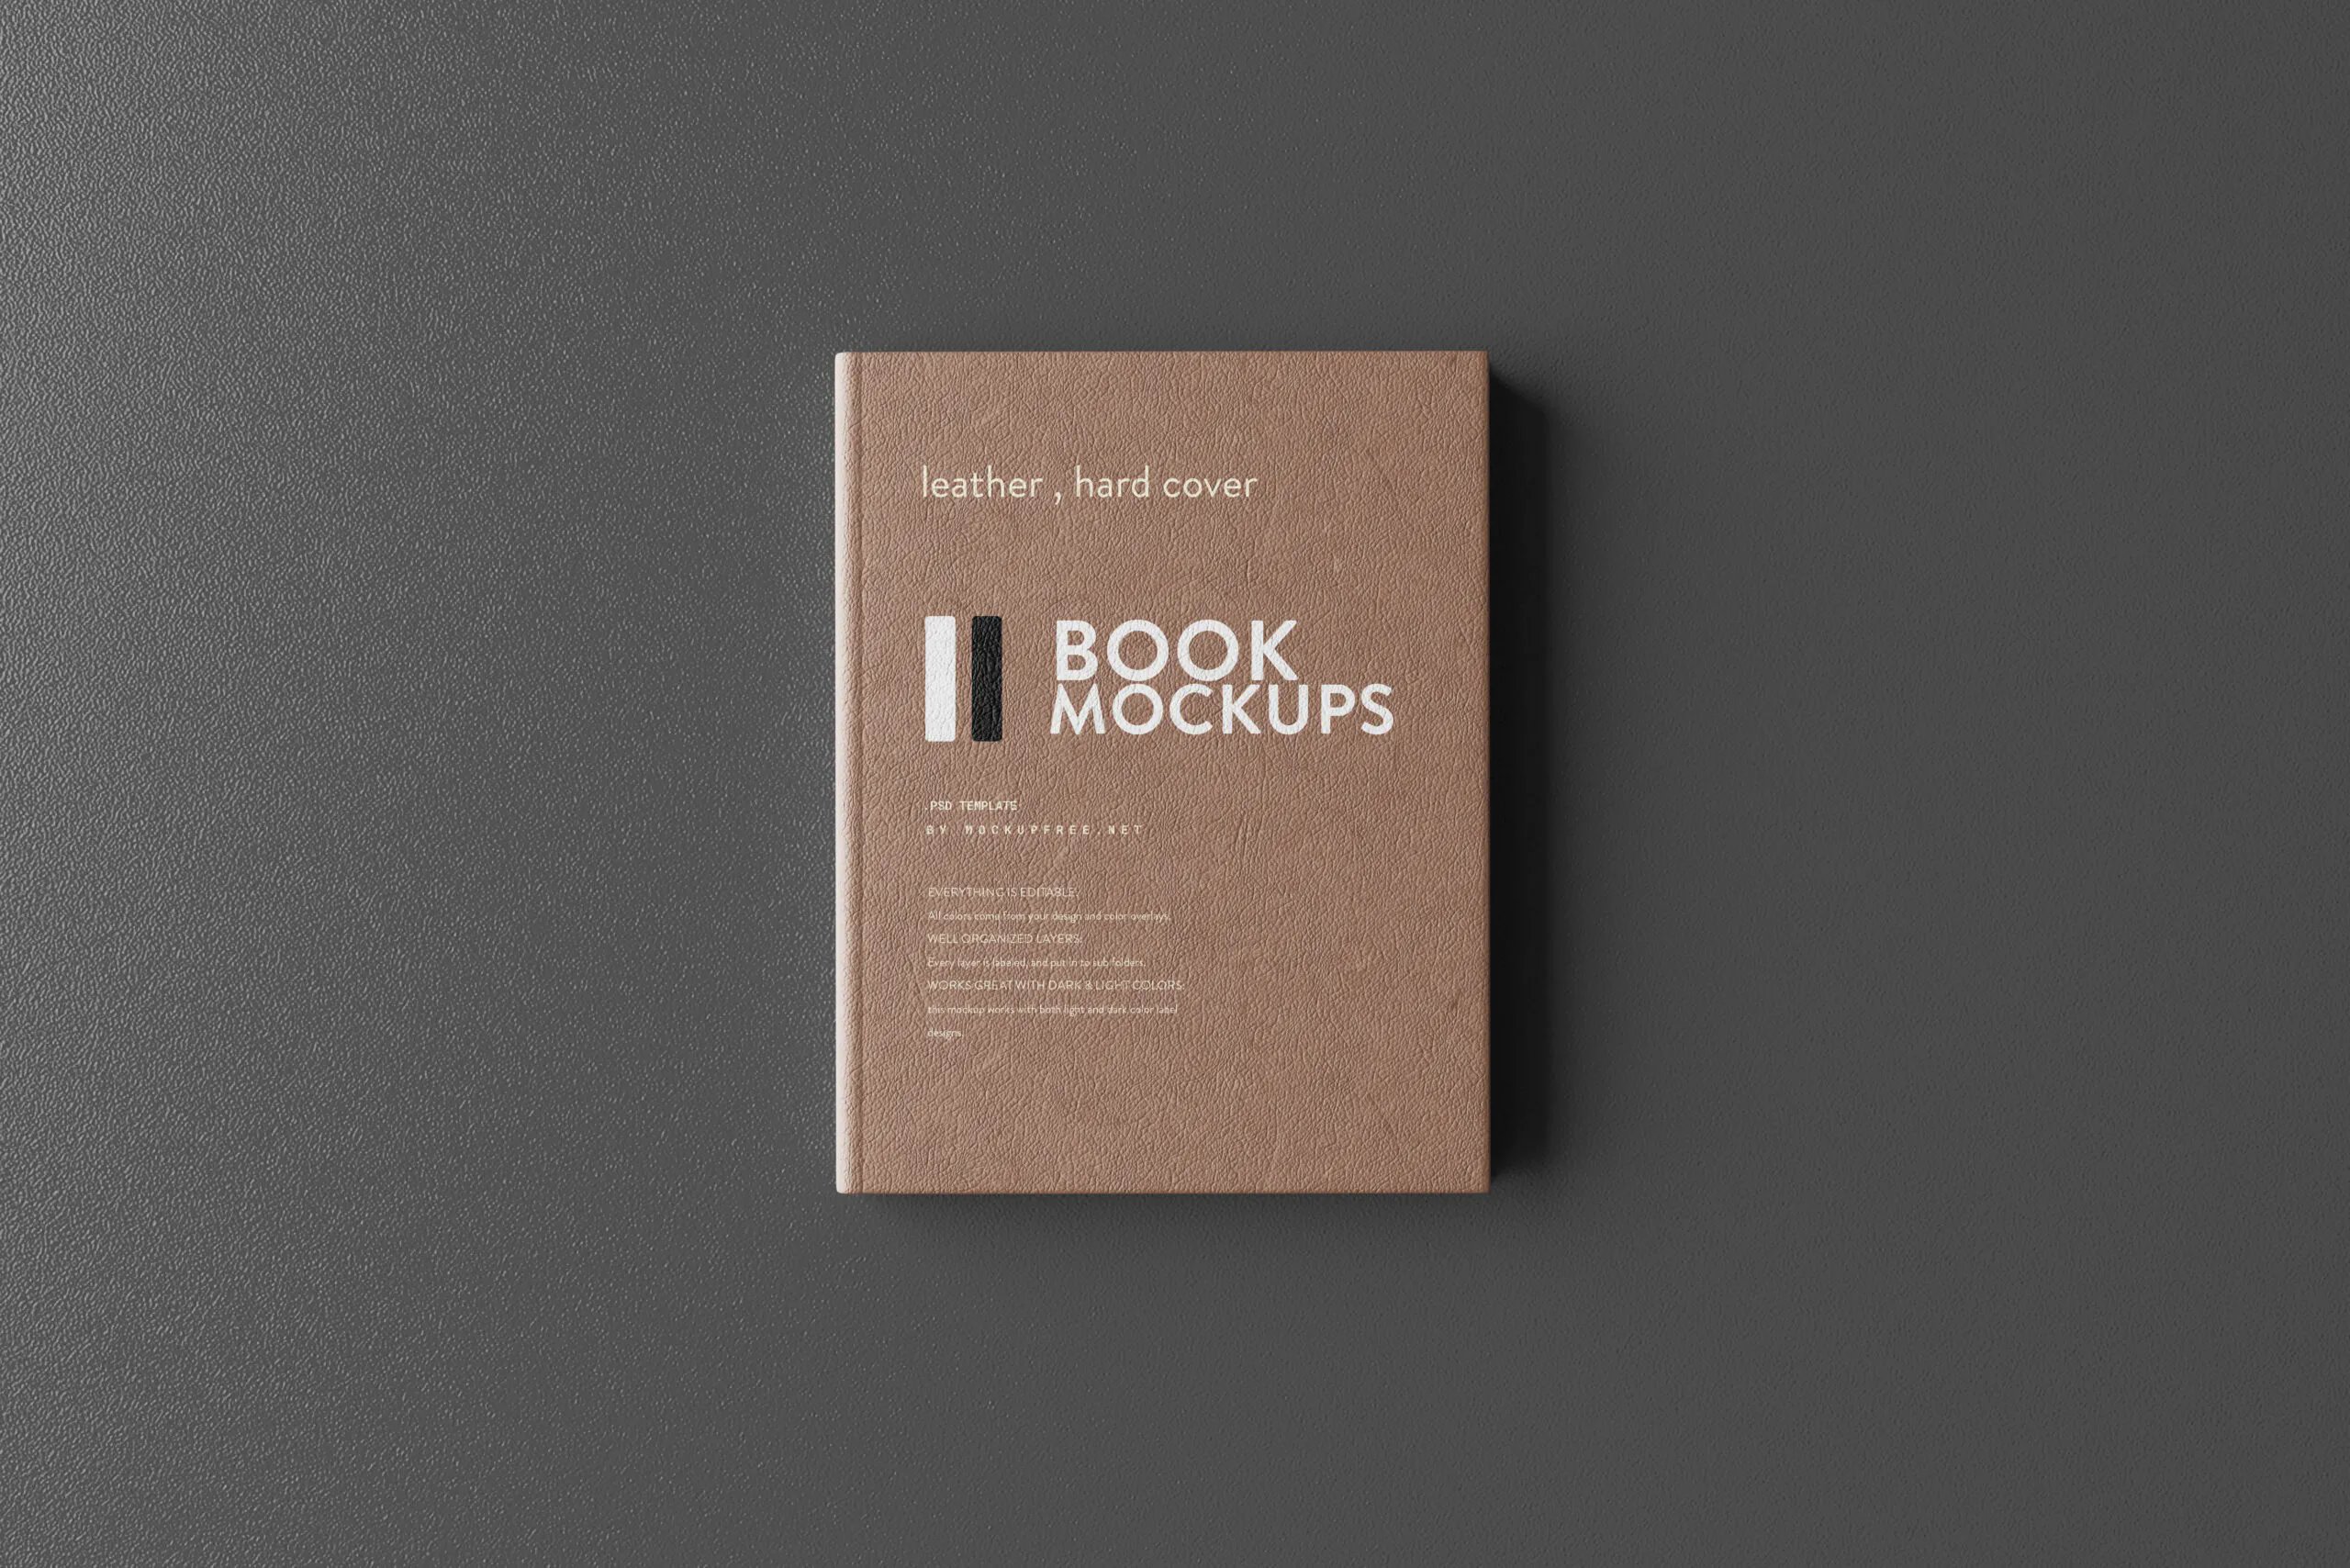 5 Mockups of Leather Hard Cover Books in Different Sights FREE PSD